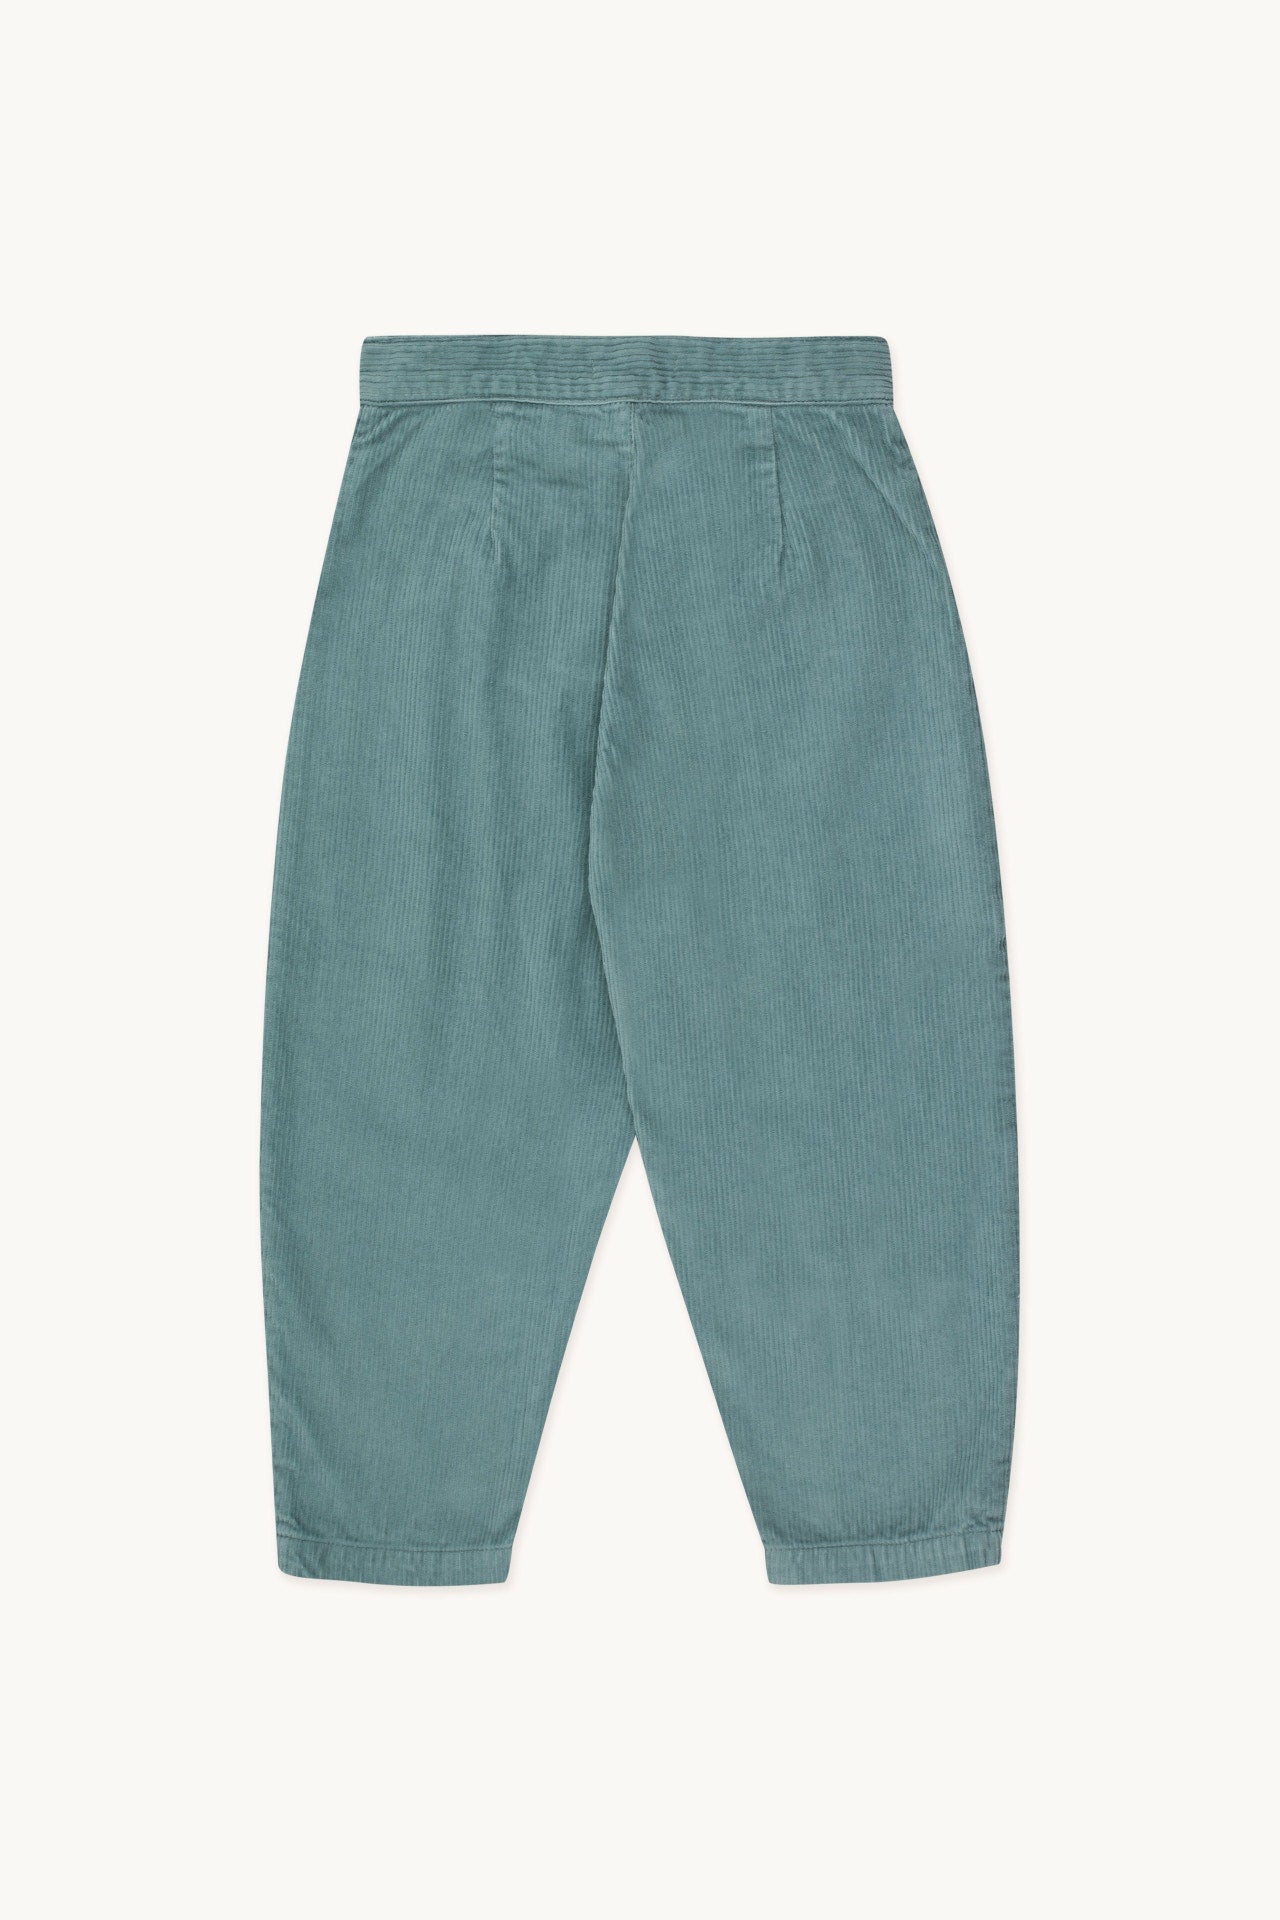 Crafted from cotton these Corduroy Pants are perfect for the winter season. With button and zip-fly opening and large pocket detail, enjoy the comfort of this winter wardrobe staple. Made in Portugal.